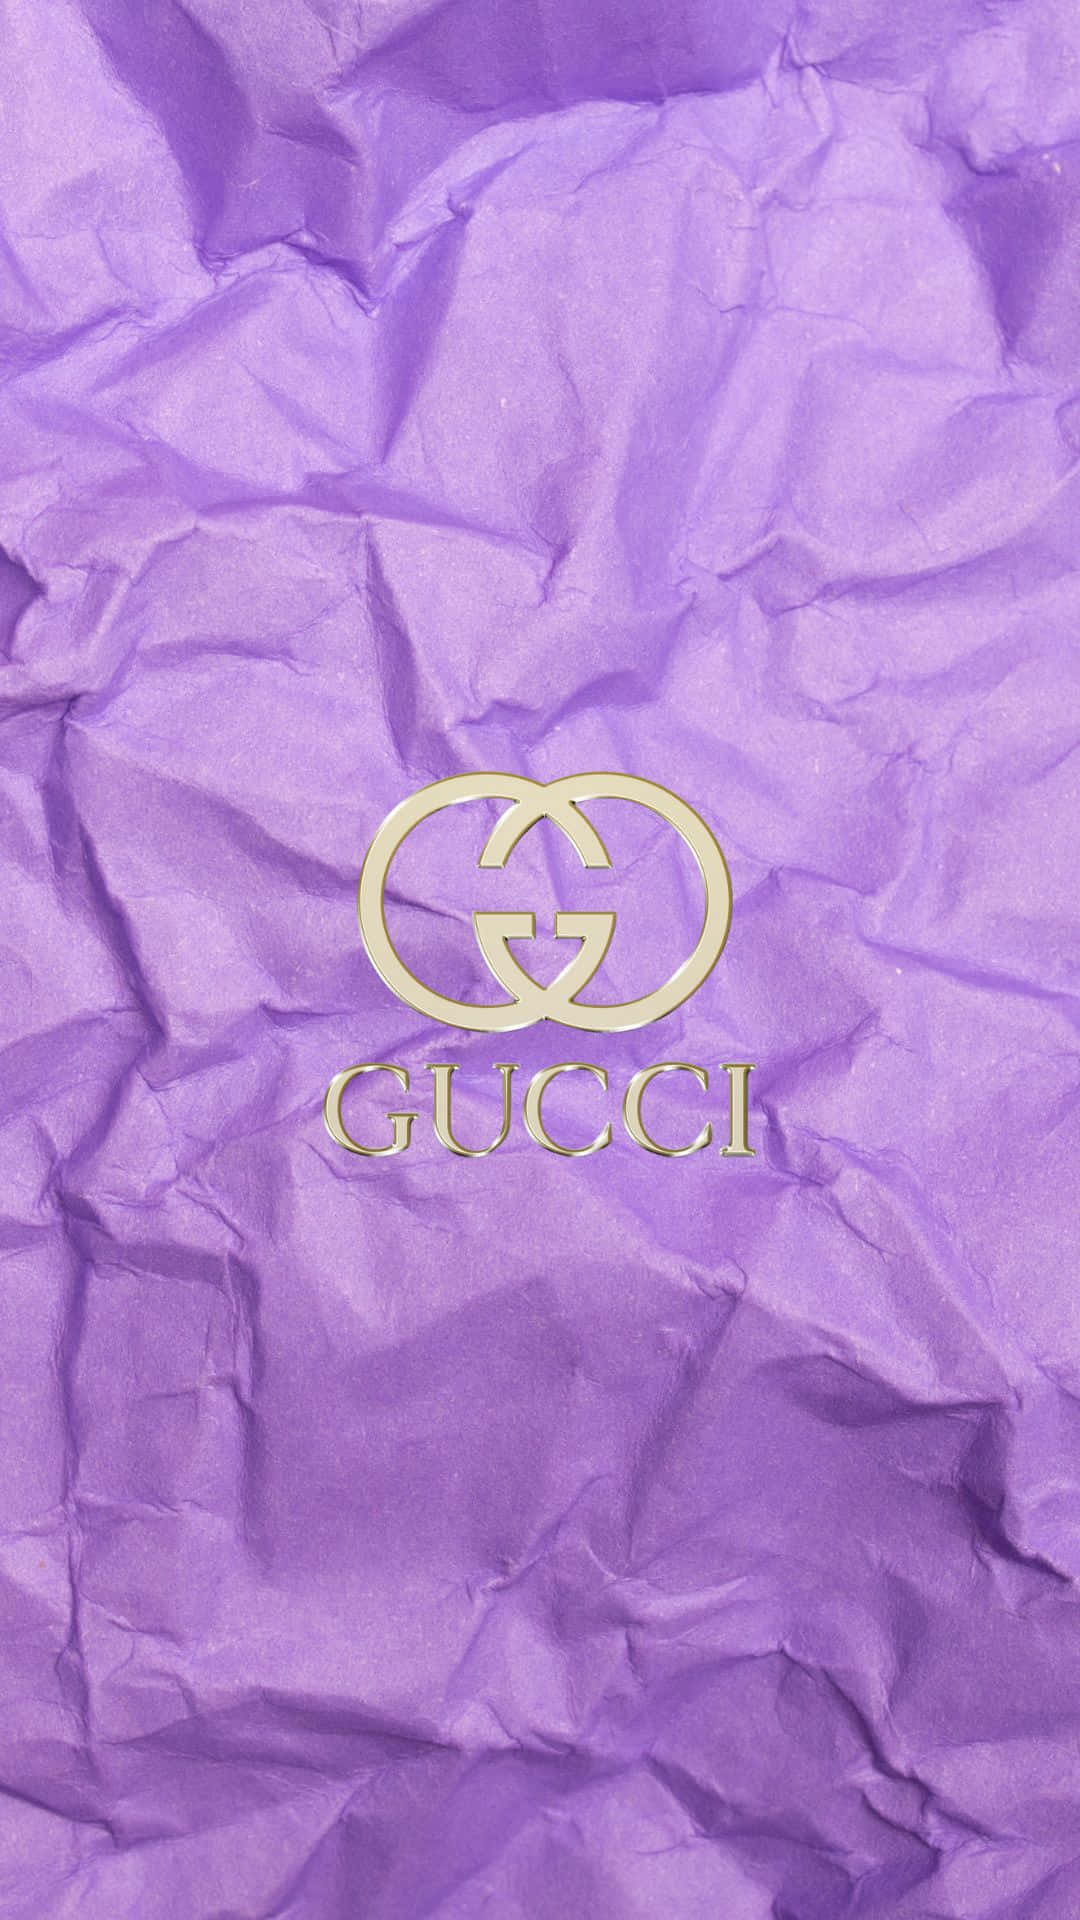 Gucci Ghost Pattern Purple Wallpapers - Wallpapers Clan